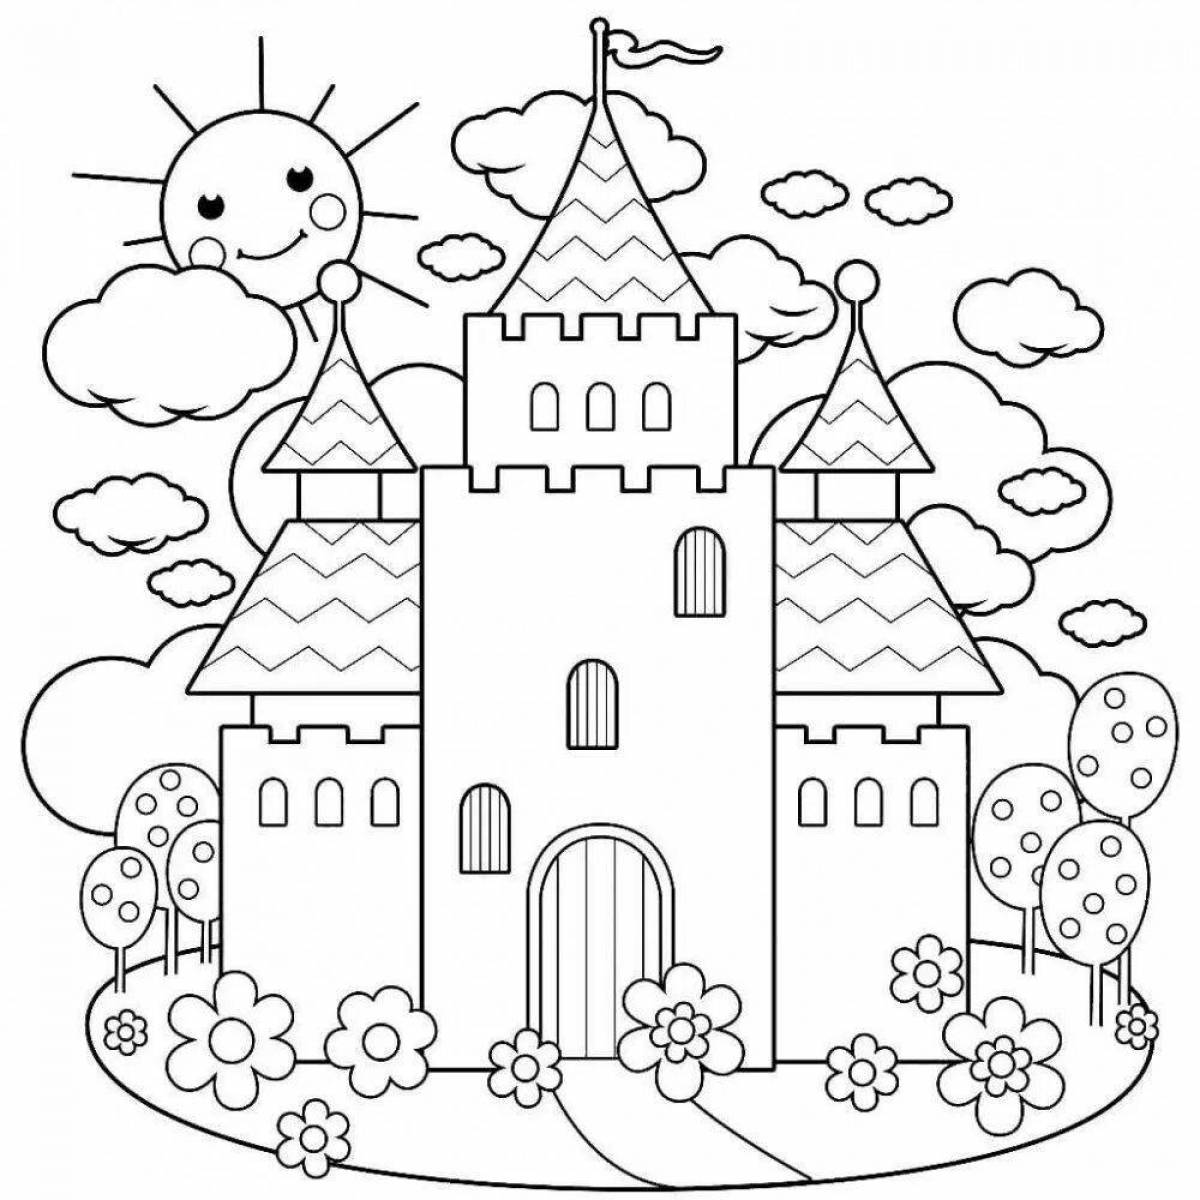 Fantastic castle coloring book for 4-5 year olds